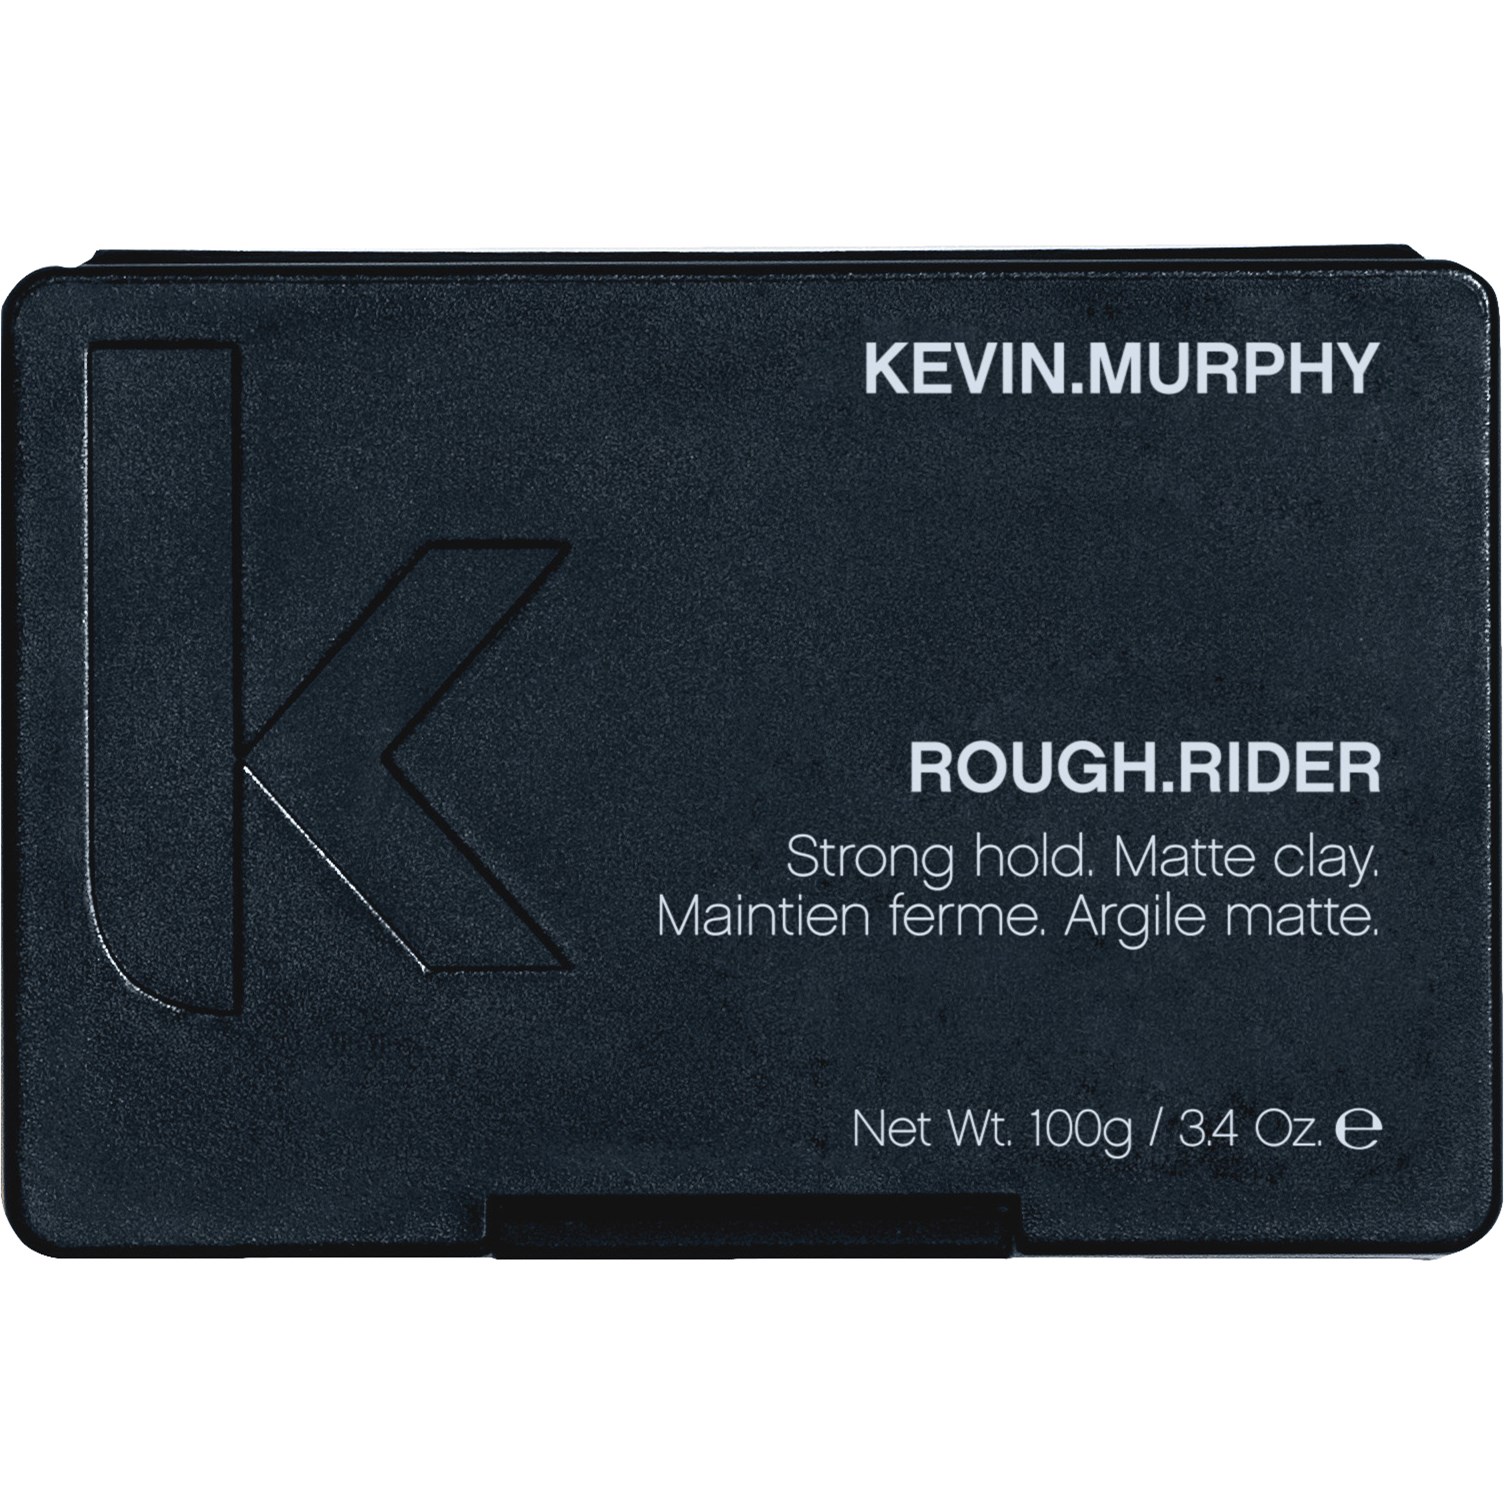 Kevin Murphy Rough.Rider 100 g